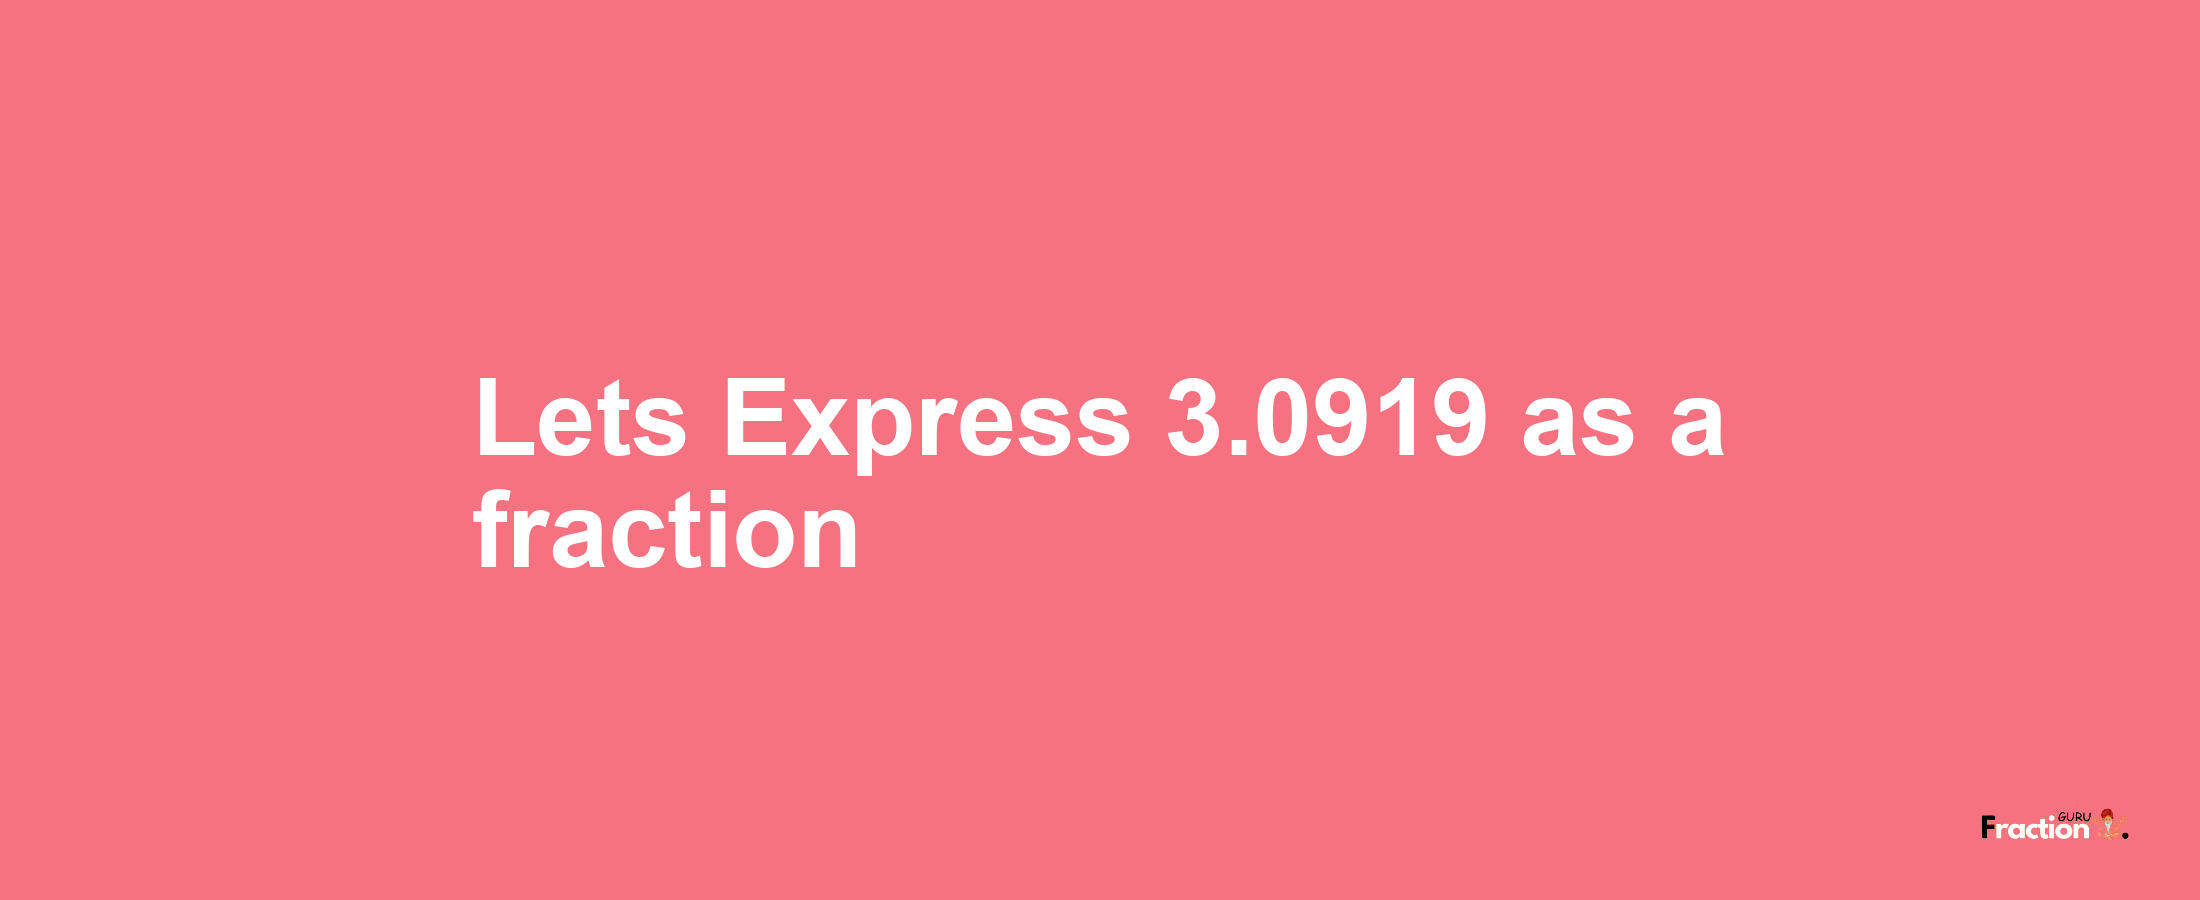 Lets Express 3.0919 as afraction